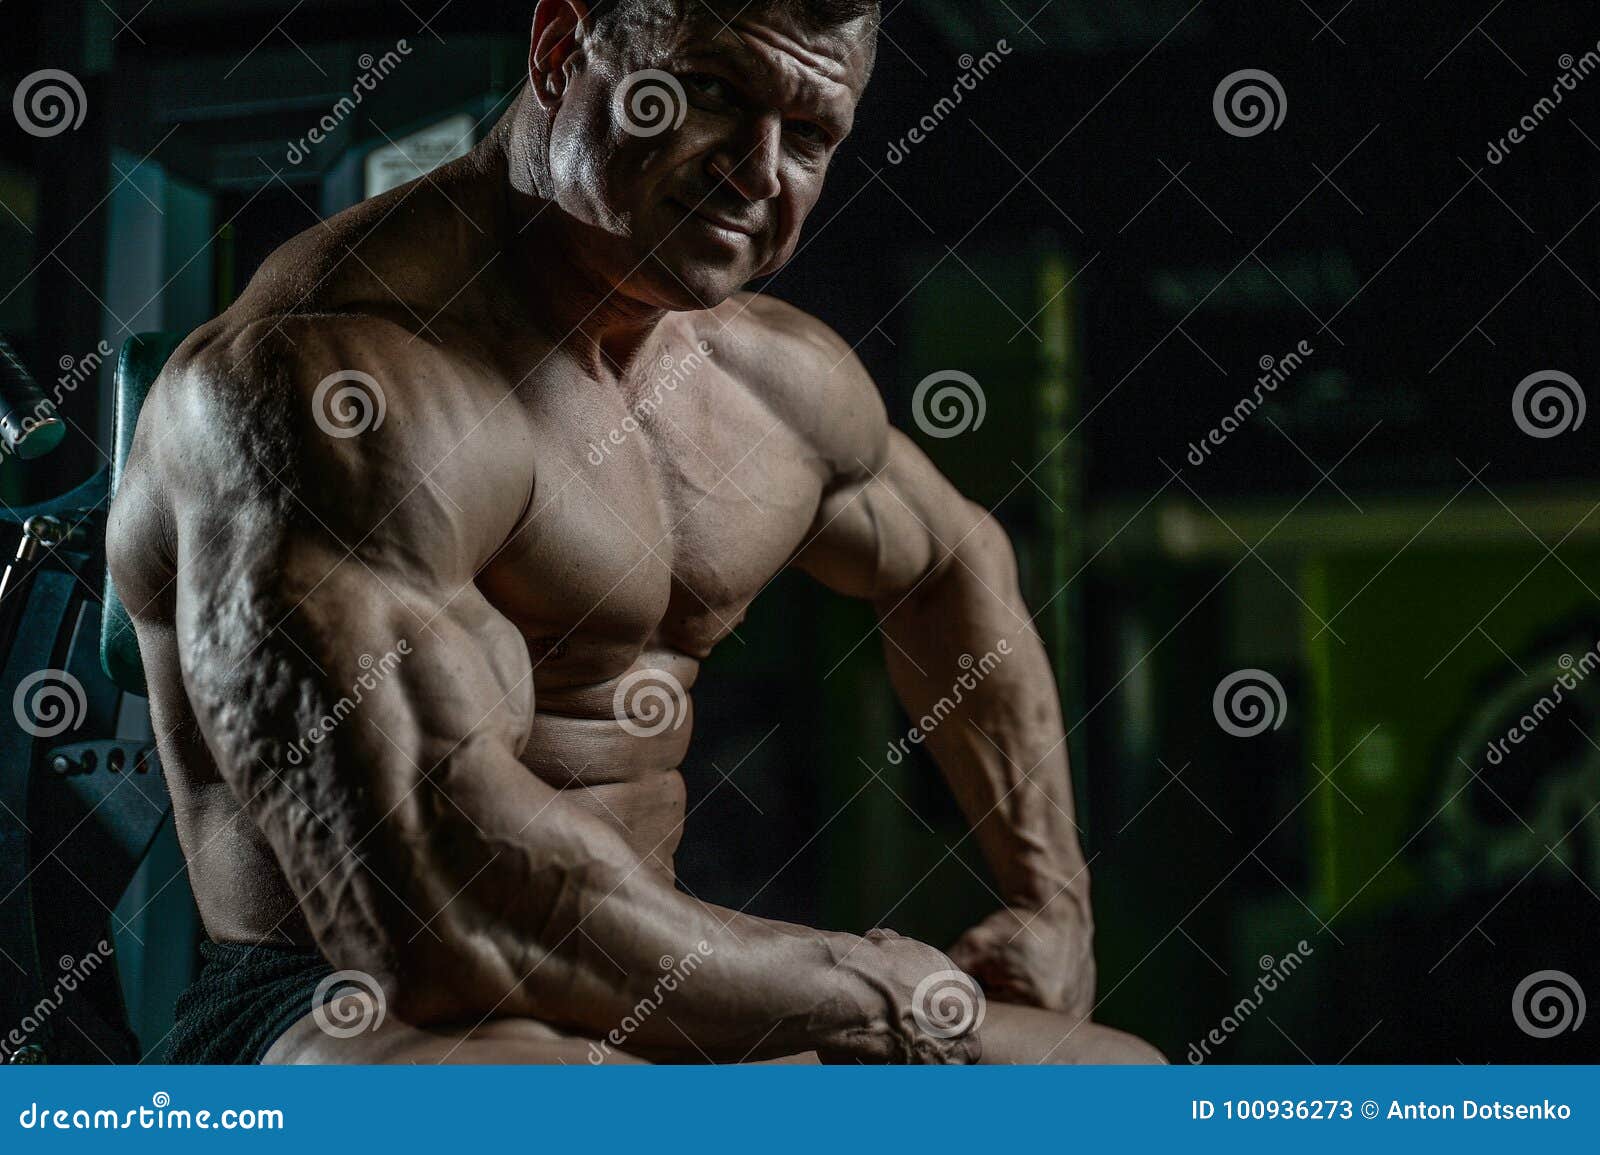 Brutal Caucasian Bodybuilder Working Out in Gym Stock Image - Image of ...